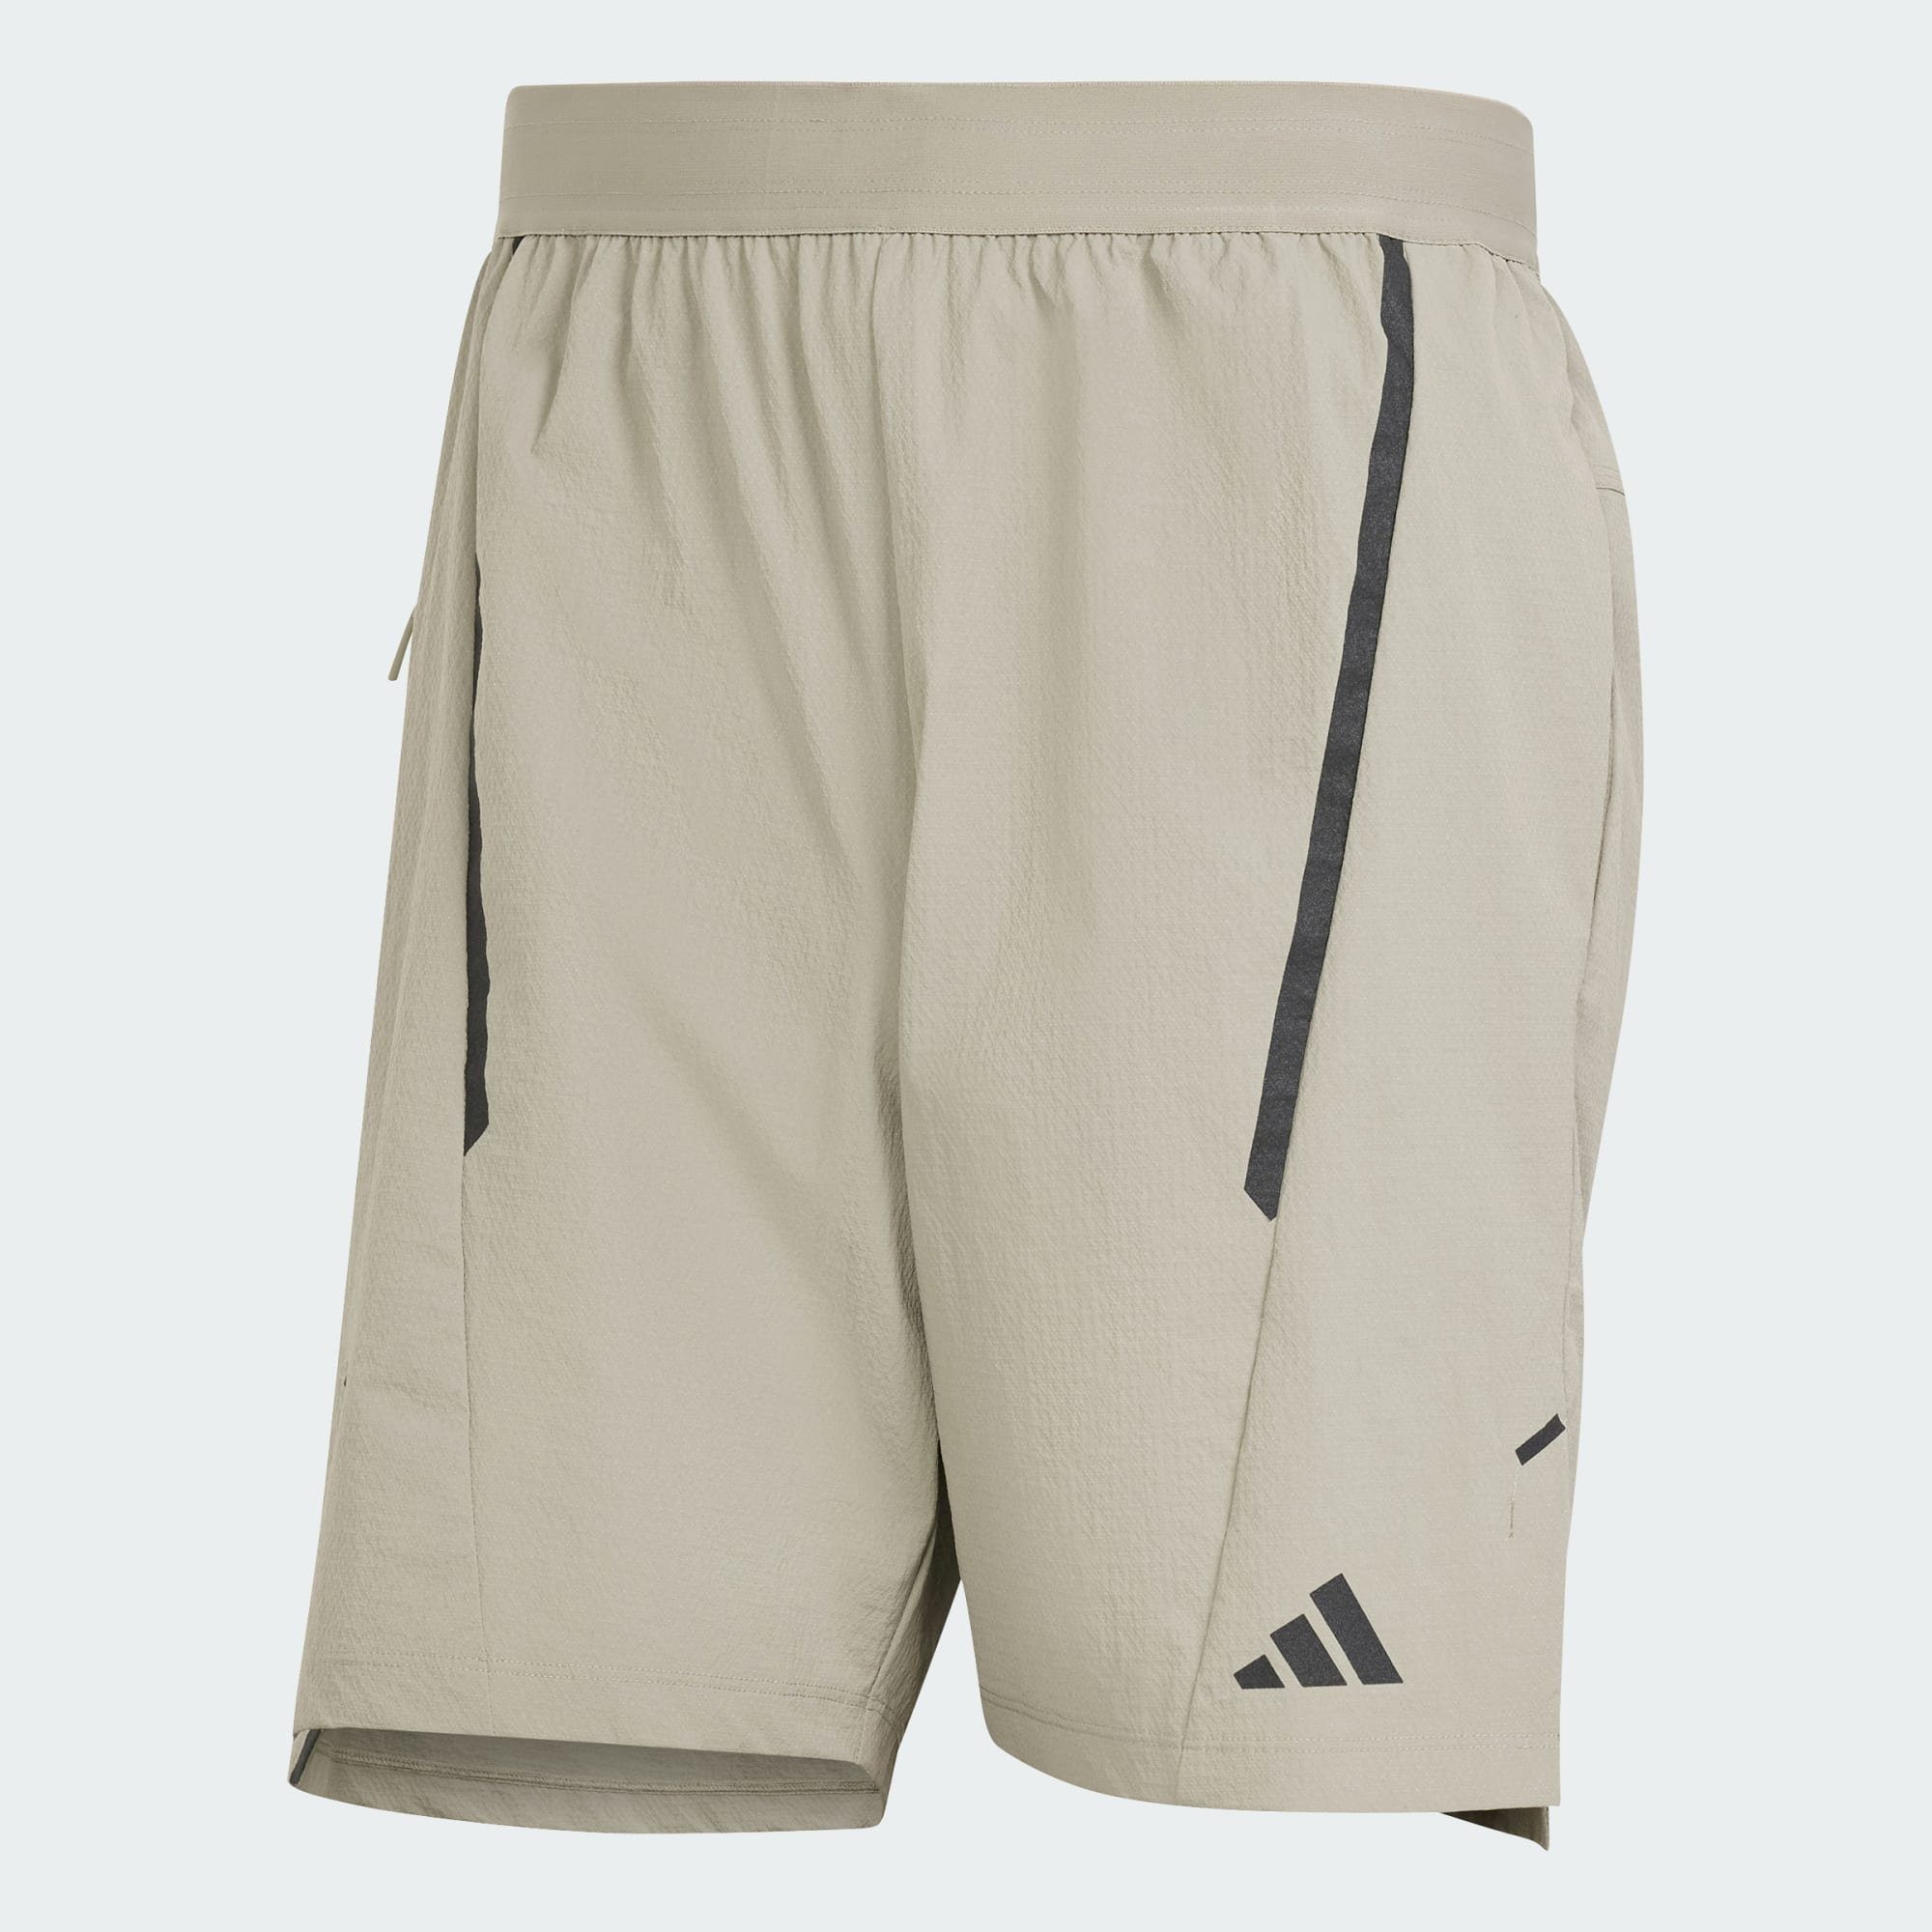 / TRAINING FOR Pebble Black Performance WORKOUT Silver adidas DESIGNED Funktionsshorts ADISTRONG SHORTS